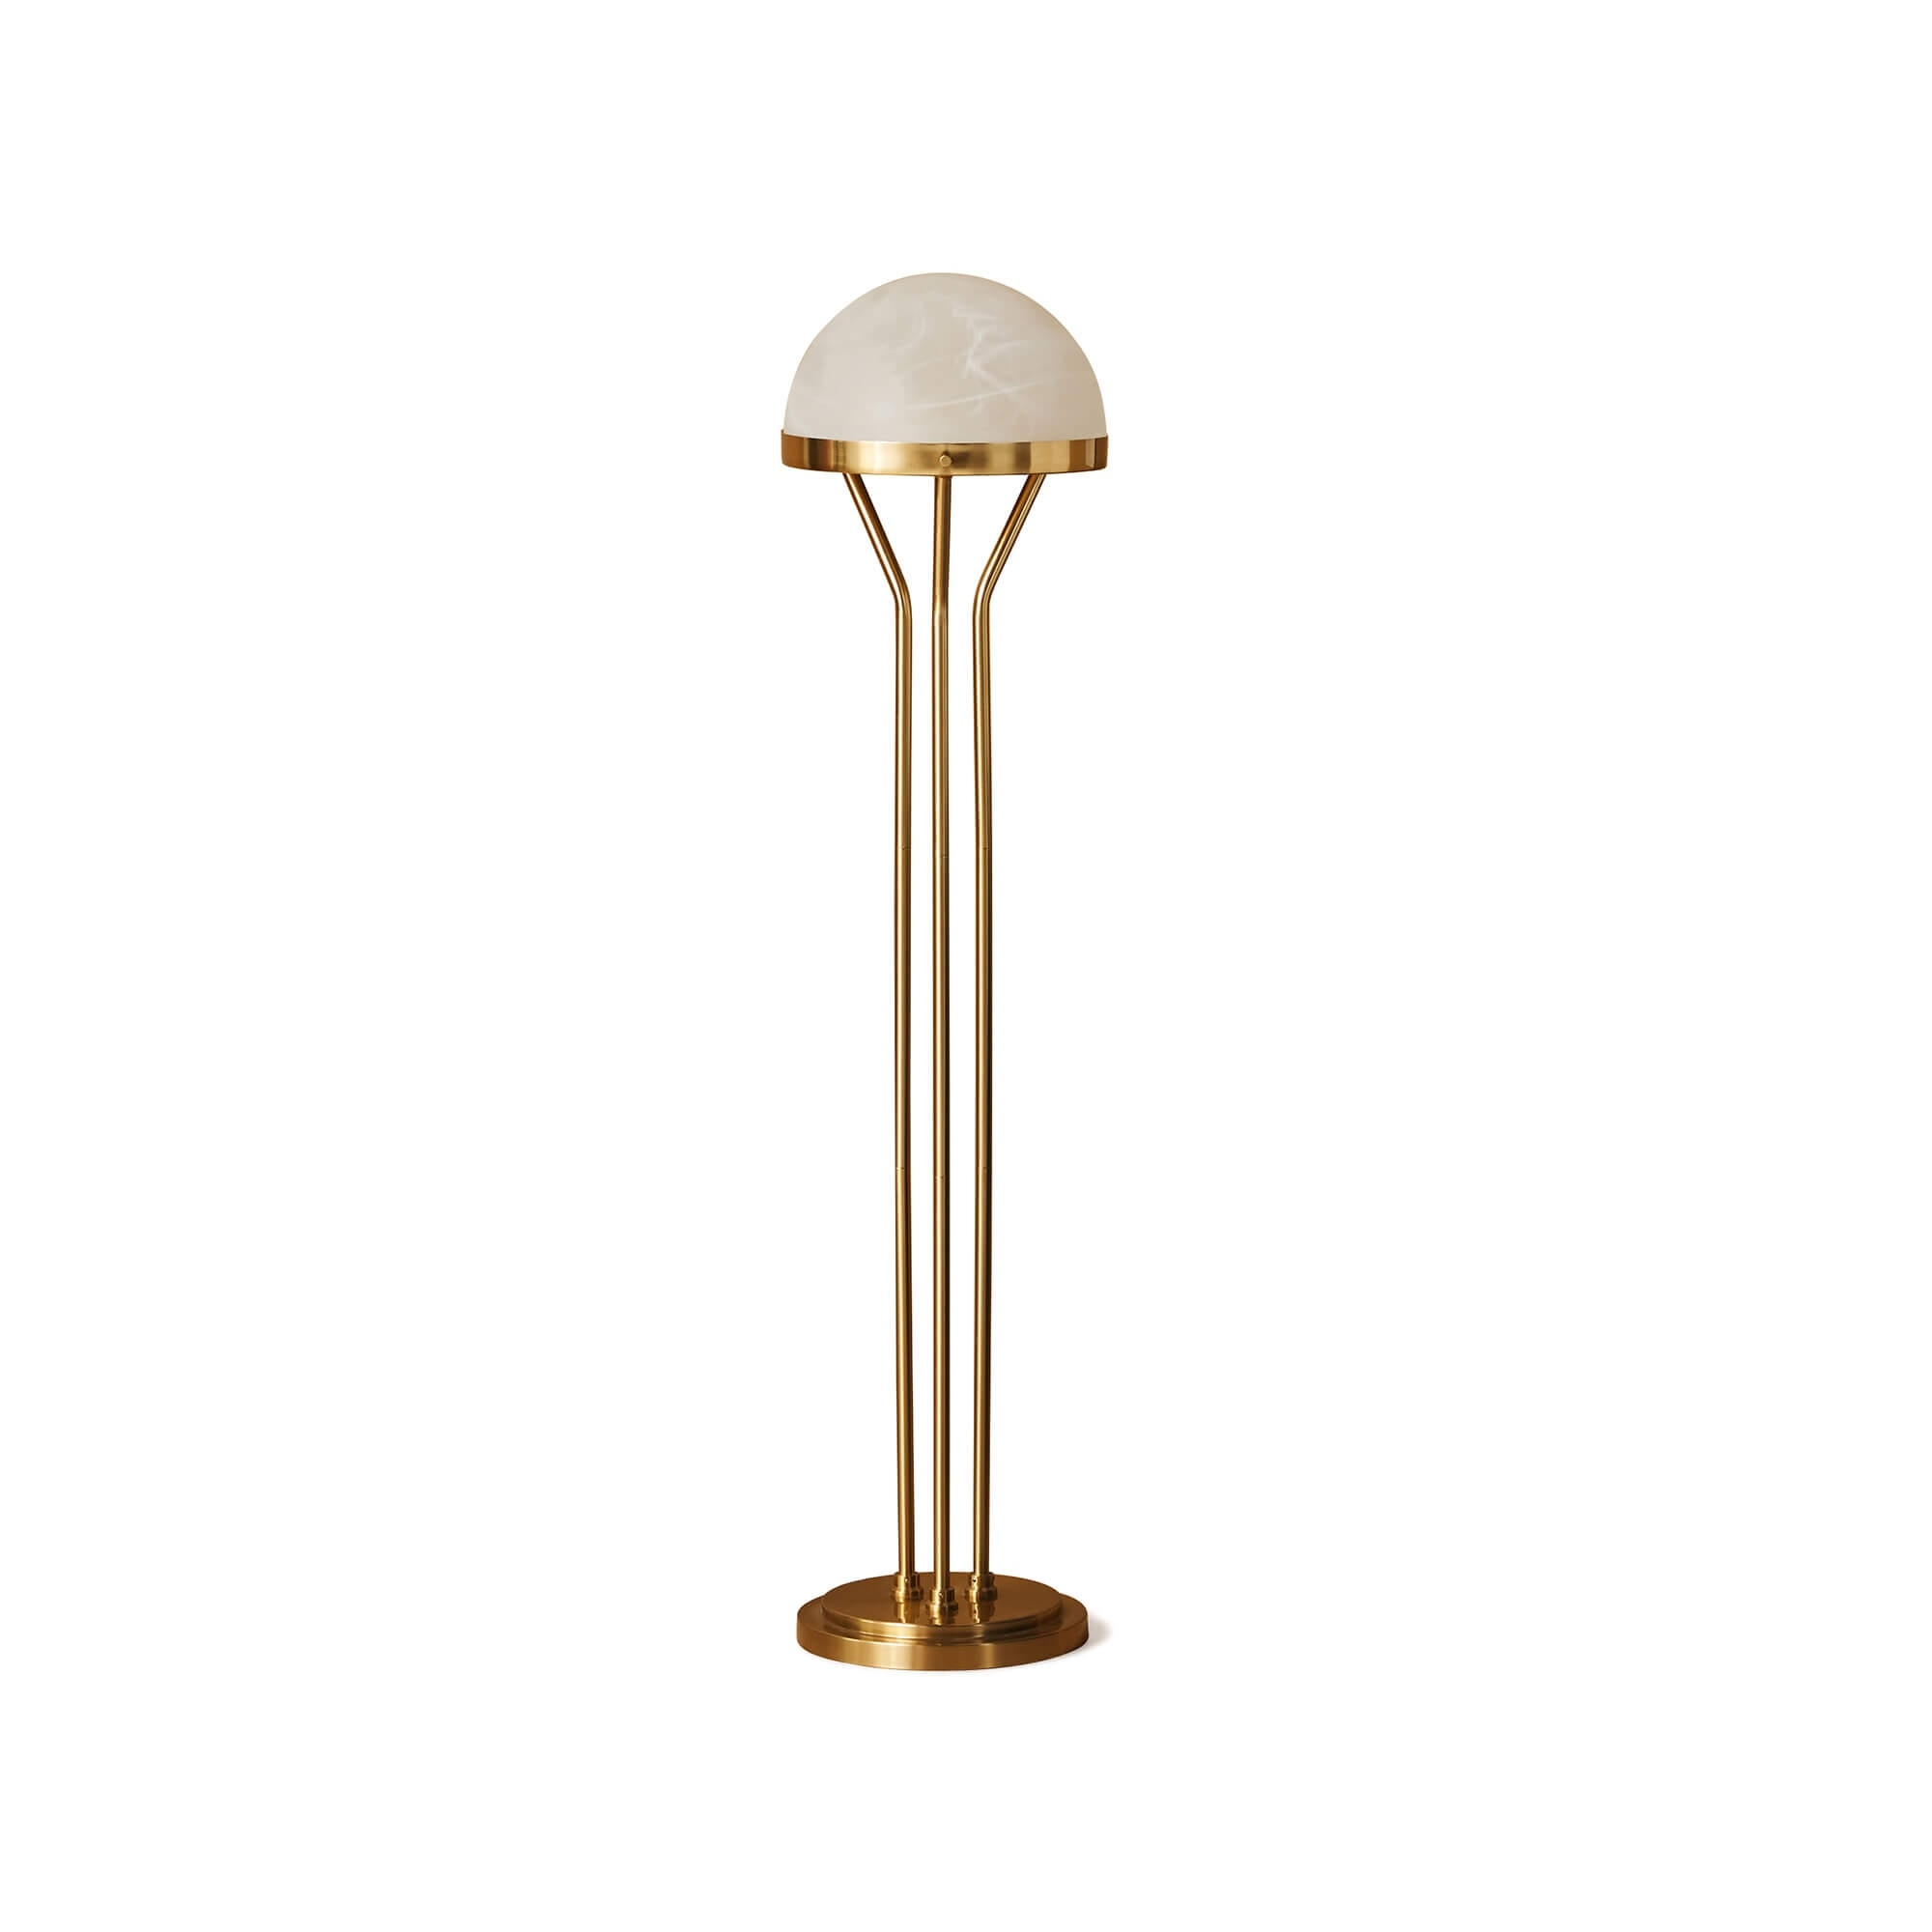 Soho Home X Anthropologie Peggy Floor Lamp intended for size 2000 X 2000